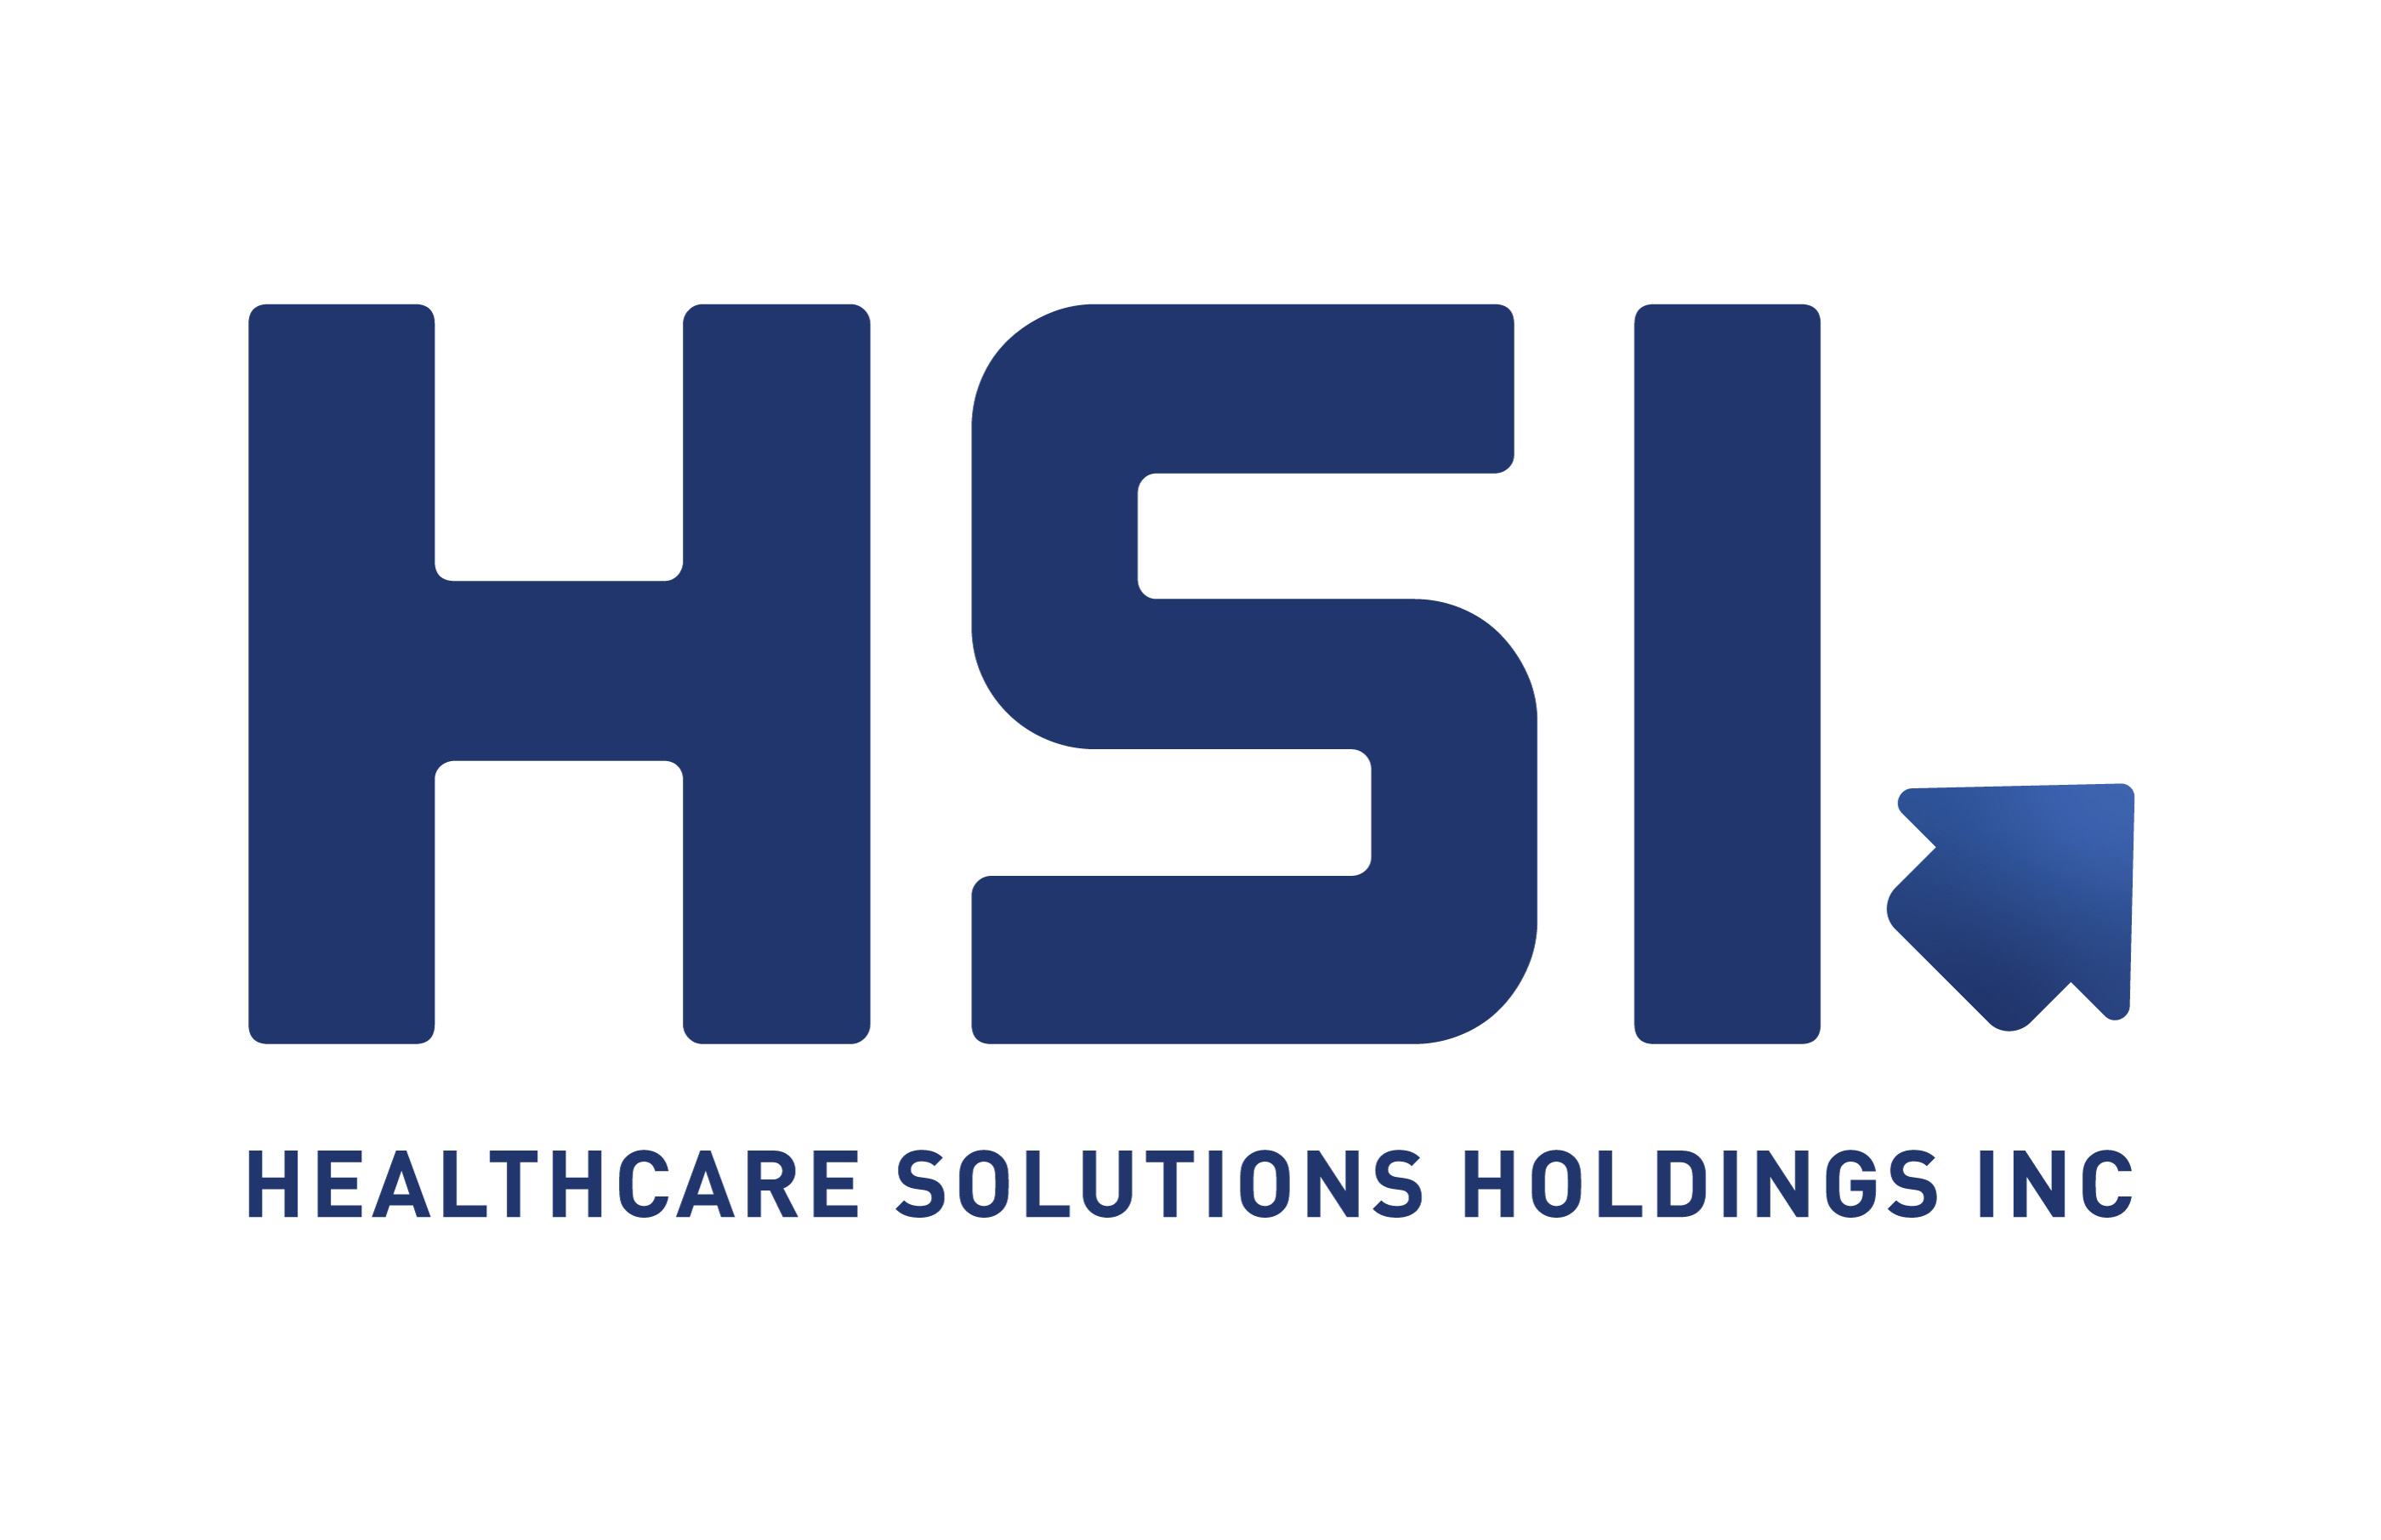 Healthcare Solutions Holdings Inc., Thursday, November 7, 2019, Press release picture